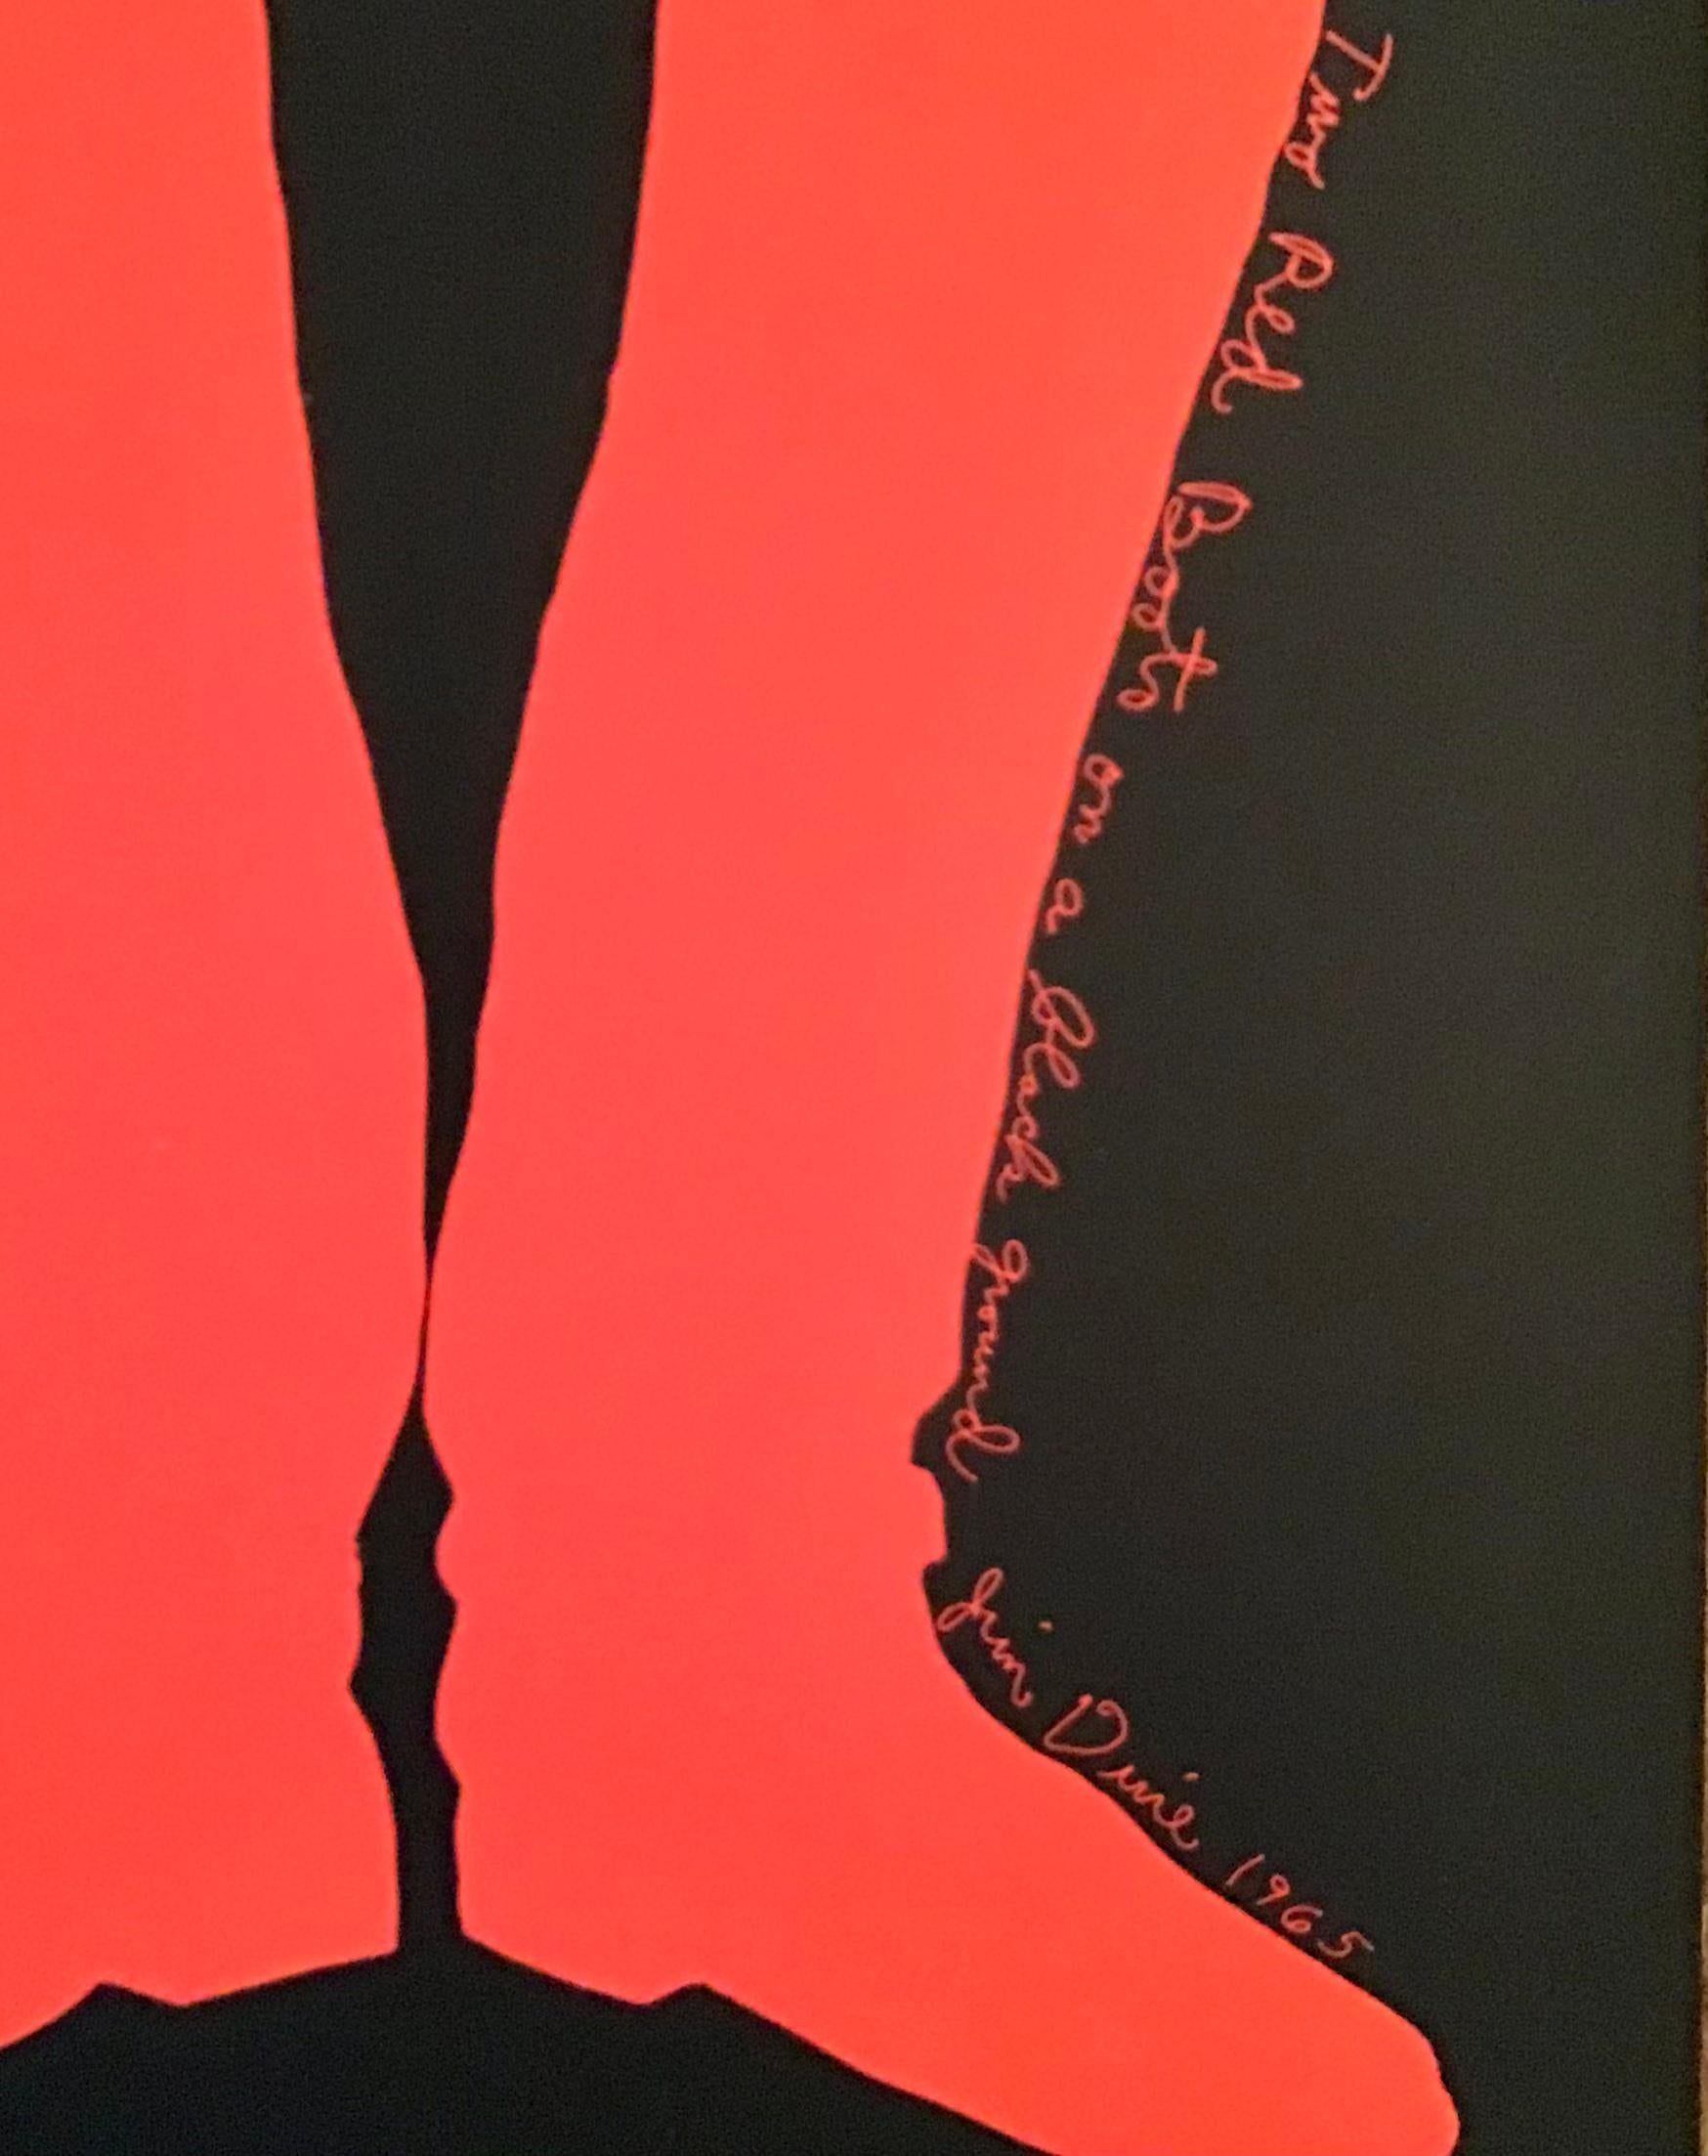 1965 Serigraph by artist, Jim Dine. Signed, titled and dated in the plate 'Two Red Boots on a Black Ground Jim Dine 1965.' Printed marks to verso Silk Screen from Banner by Jim Dine for Multiples Inc. 1968. Not framed.